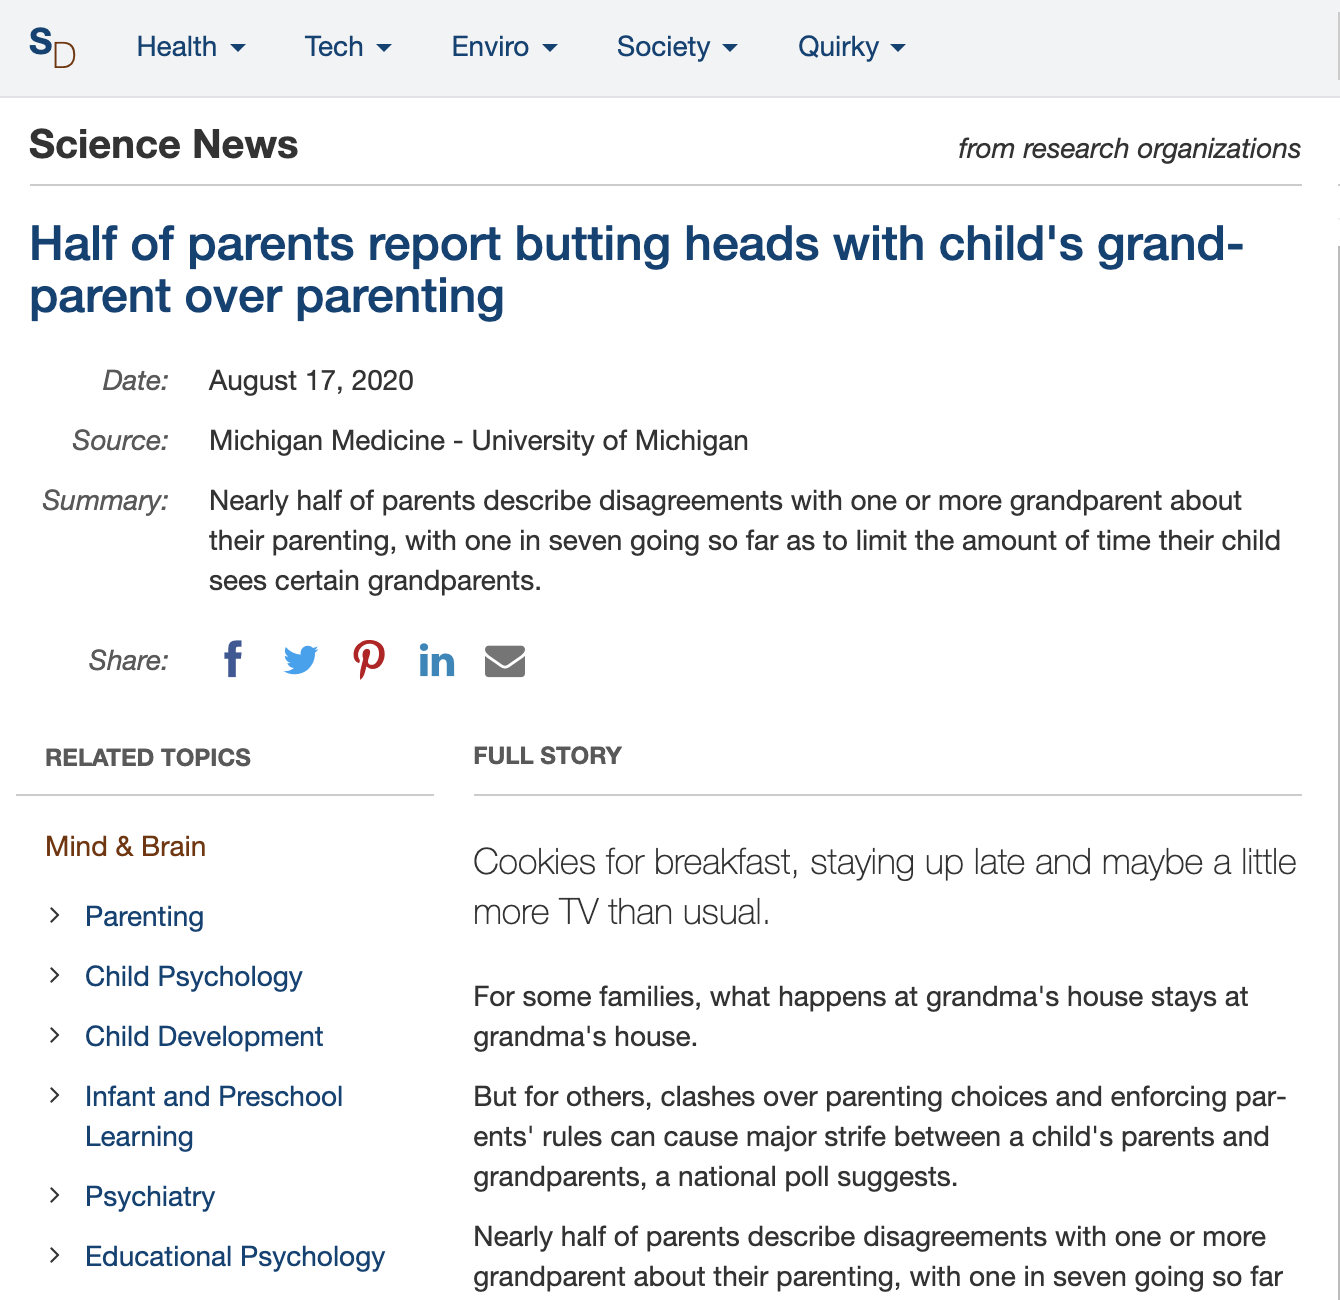 screenshot of a page on sciencedaily showing a new research report